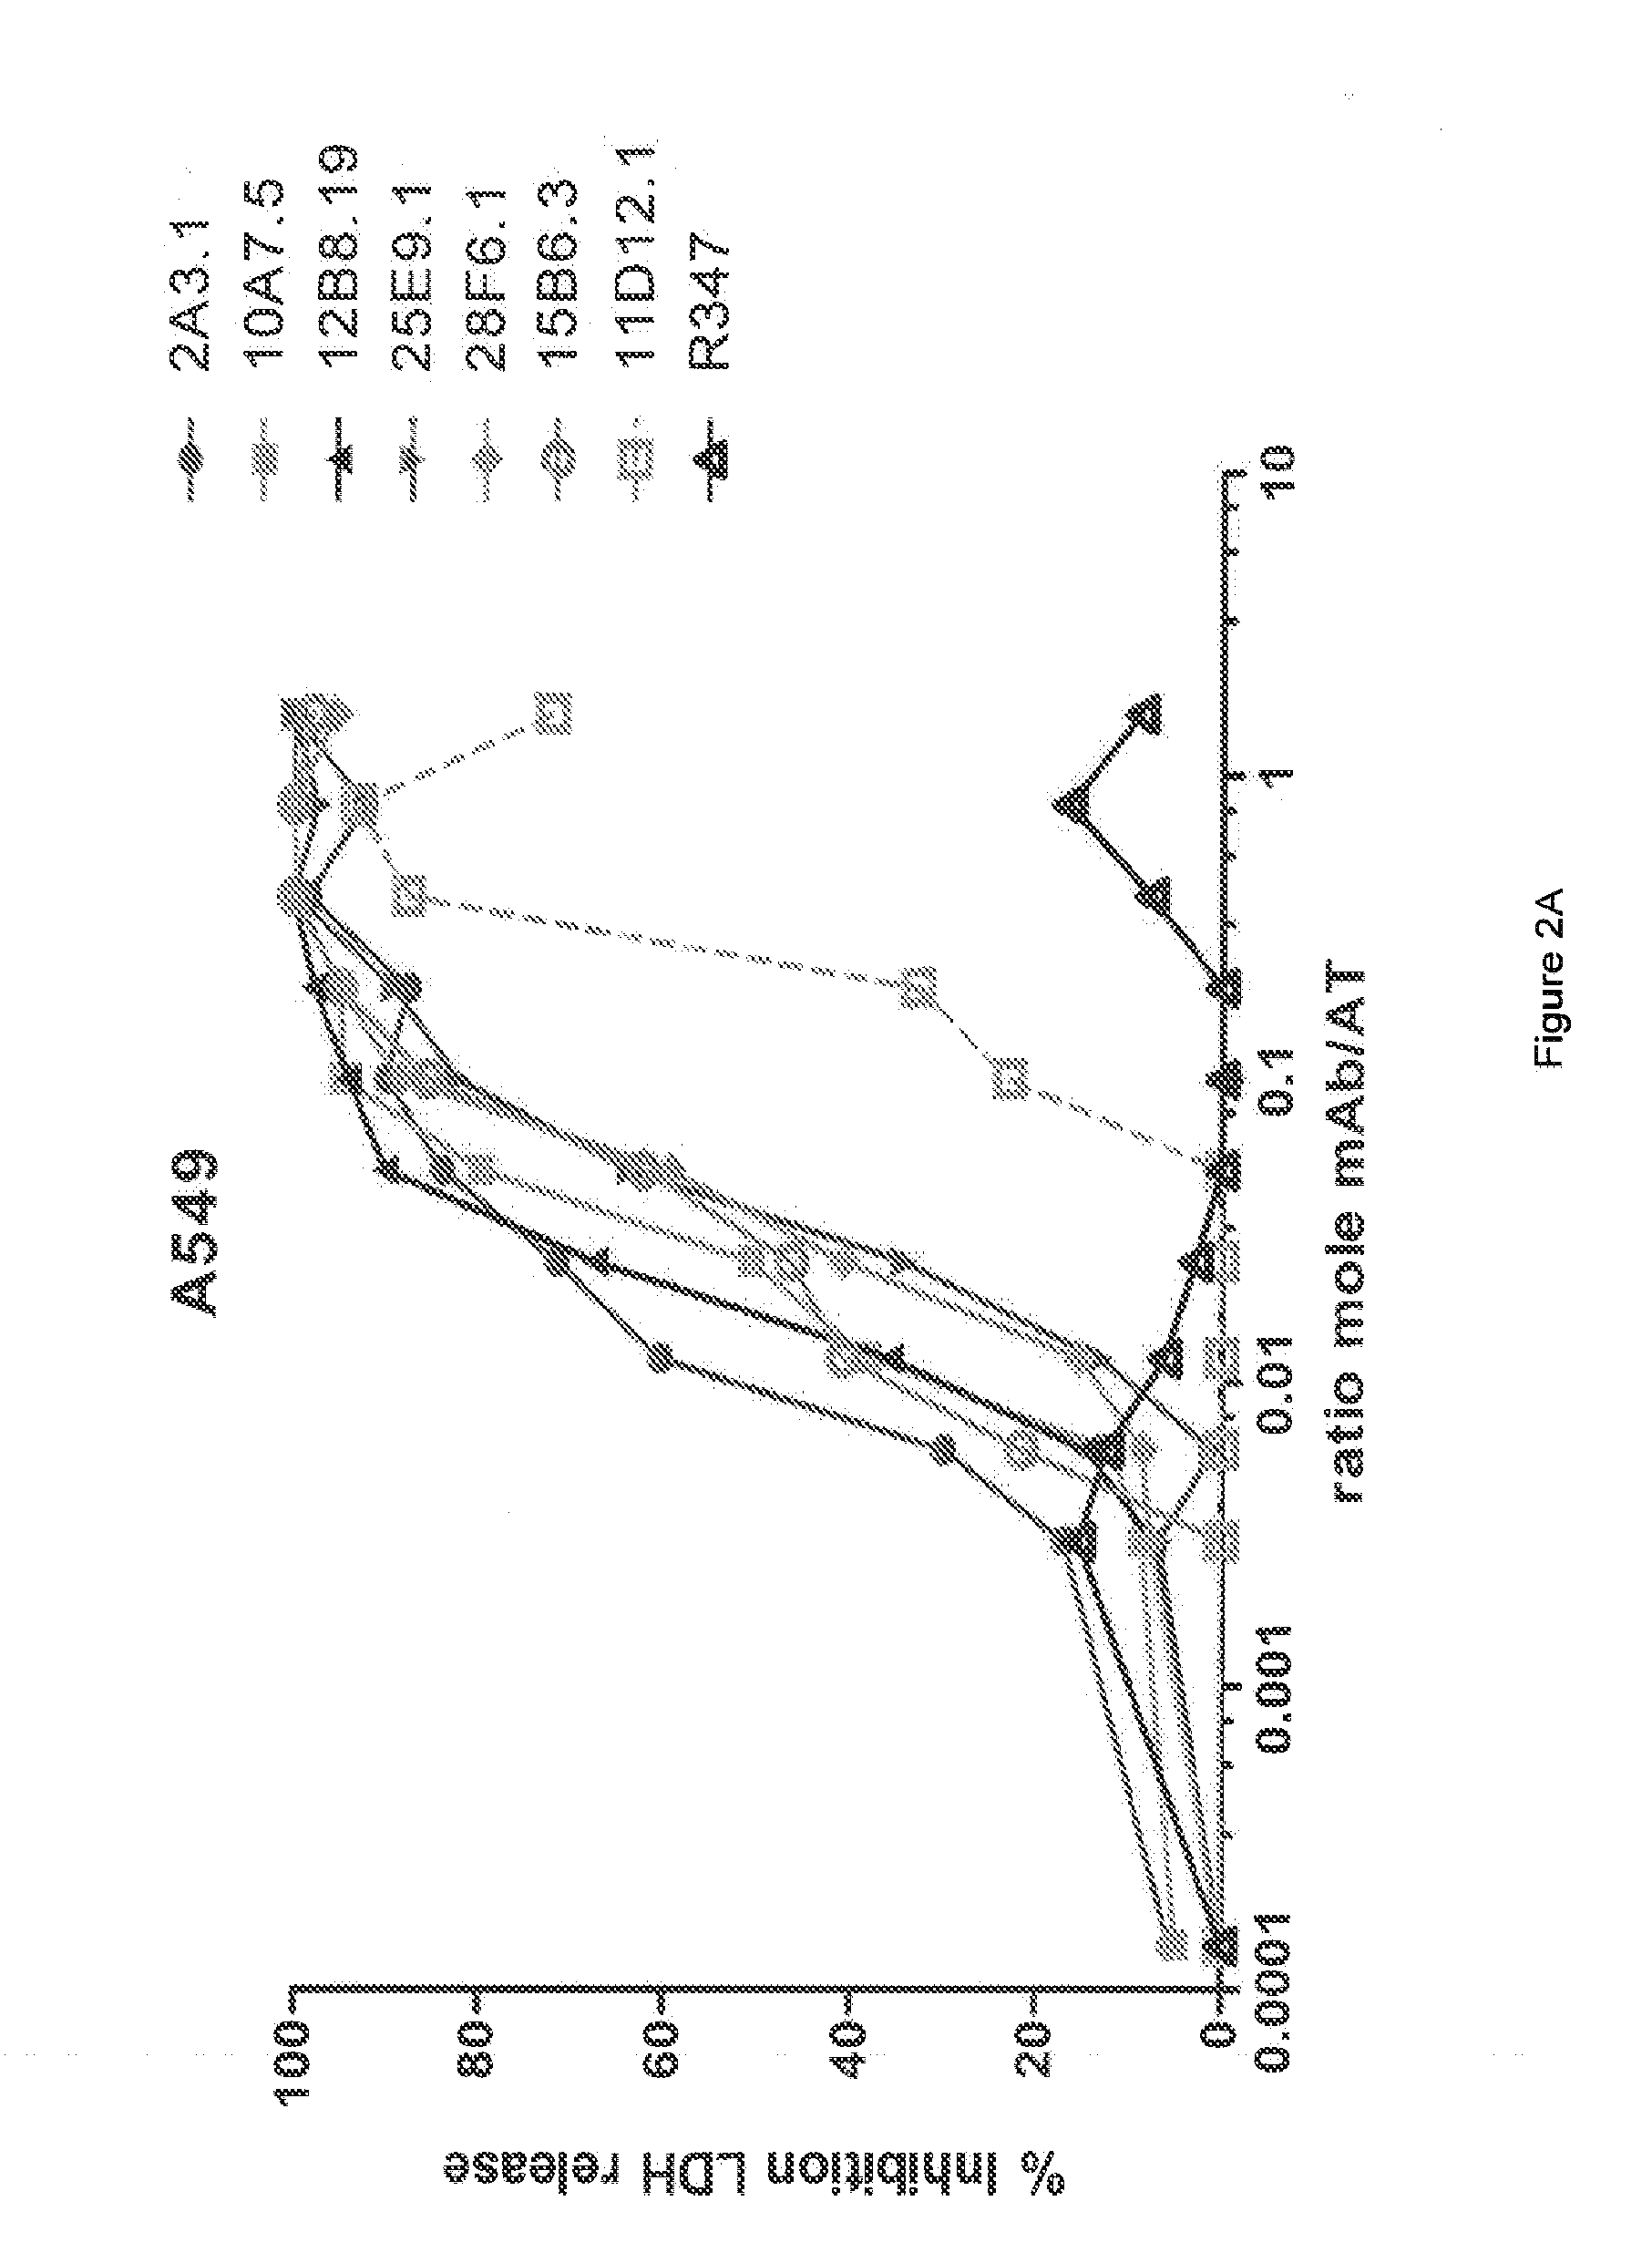 Antibodies that specifically bind staphylococcus aureus alpha toxin and methods of use